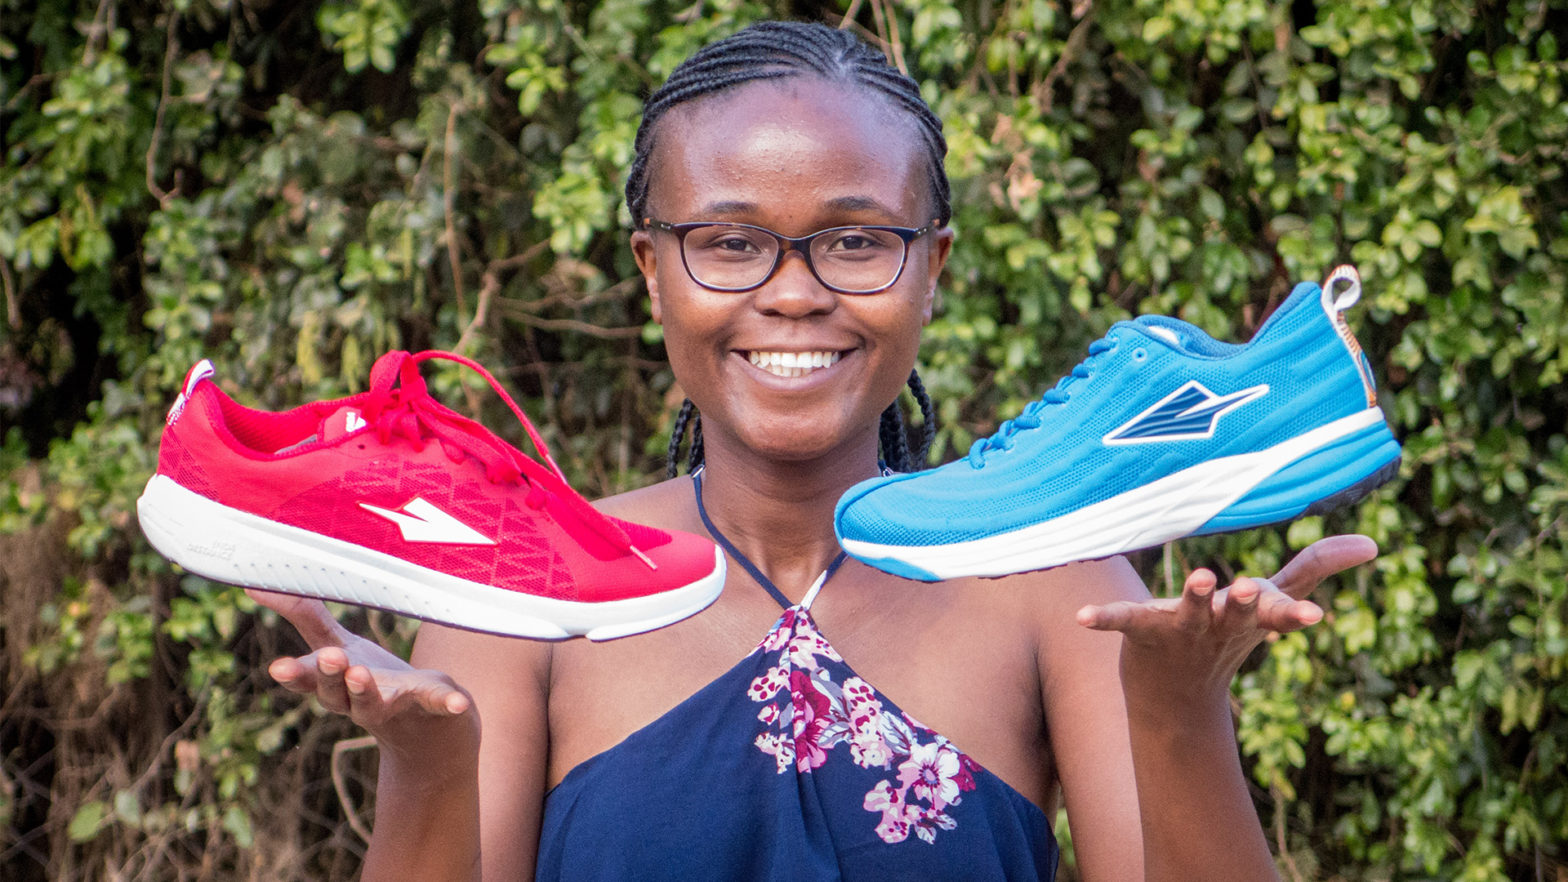 Navalayo Osembo's Enda Secures $1.1M Investment To Produce Africa's First Running Shoe Brand